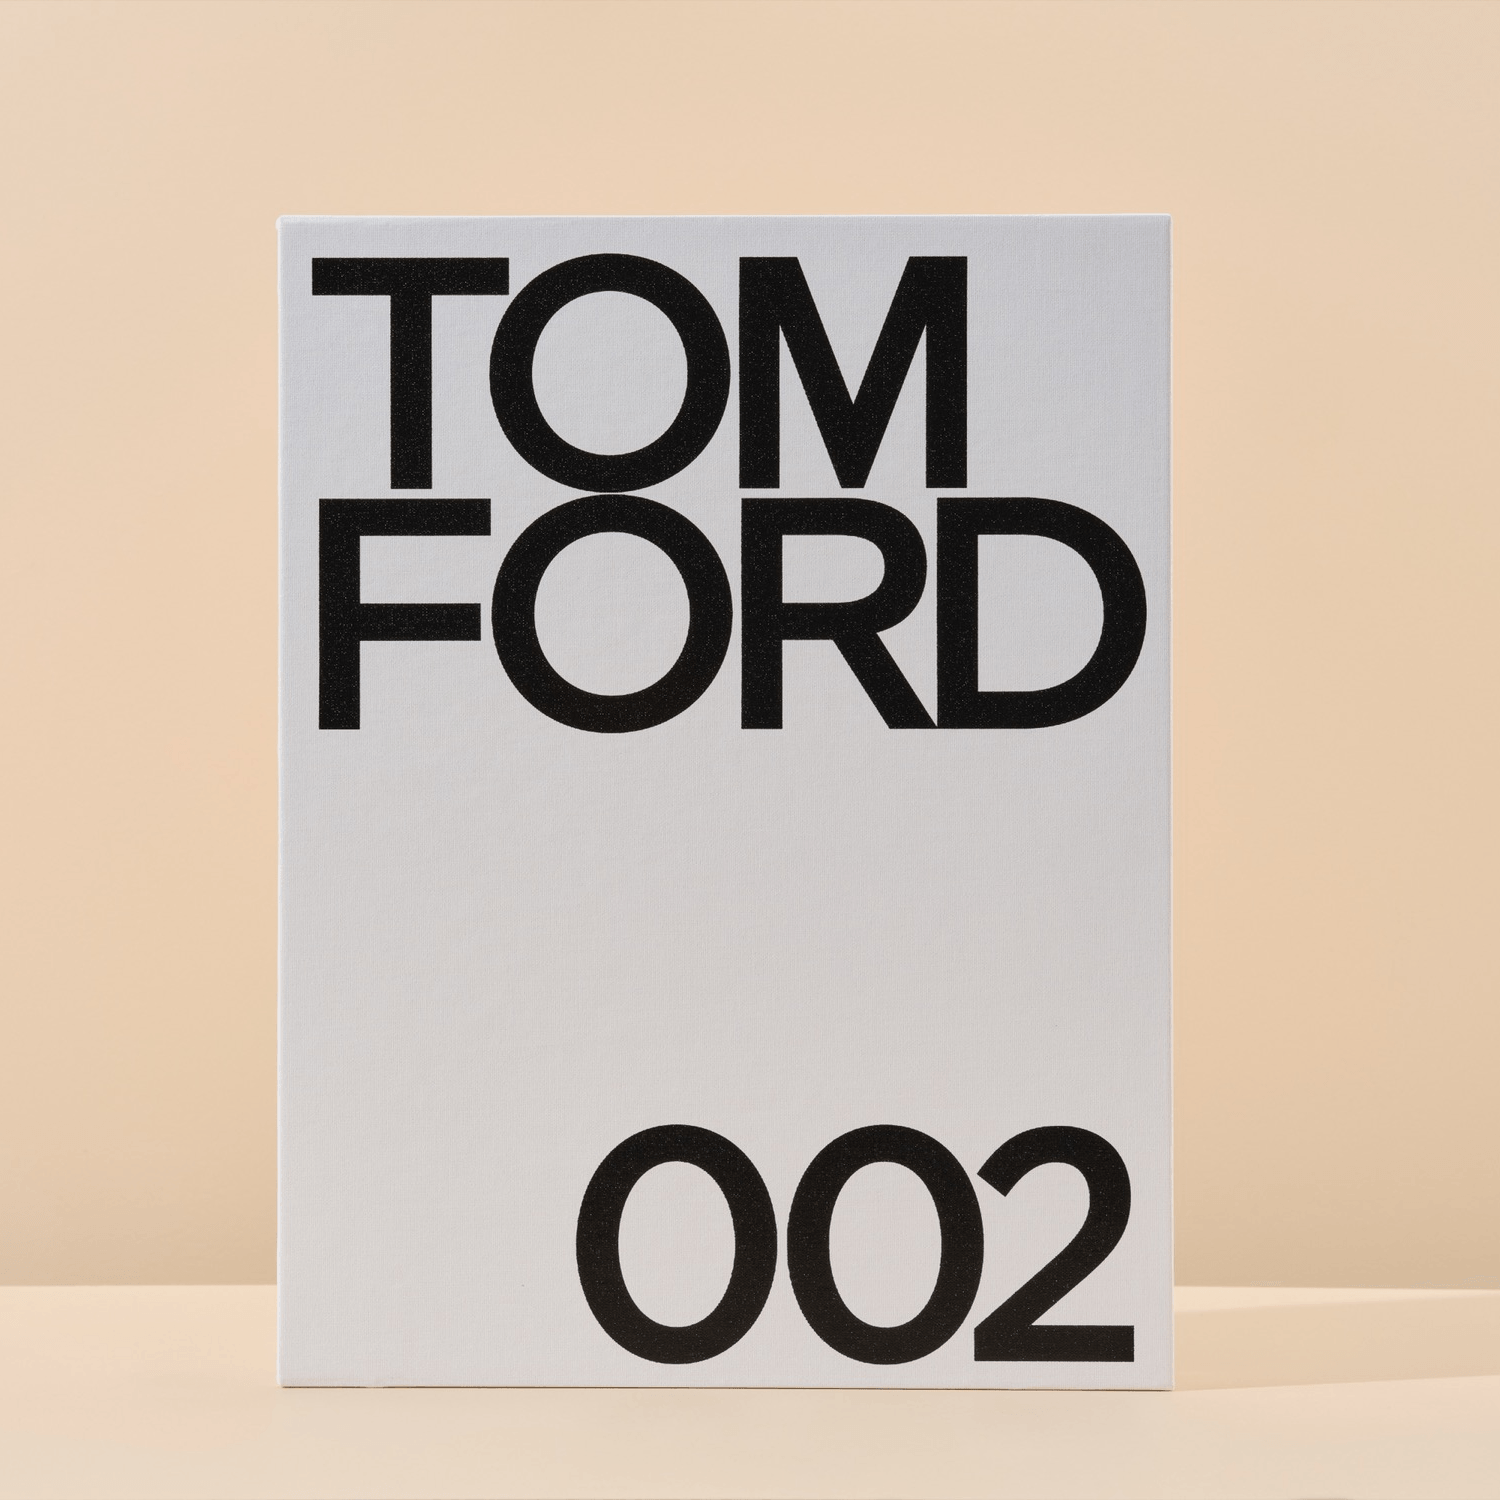 Tom Ford 002 Book Cover